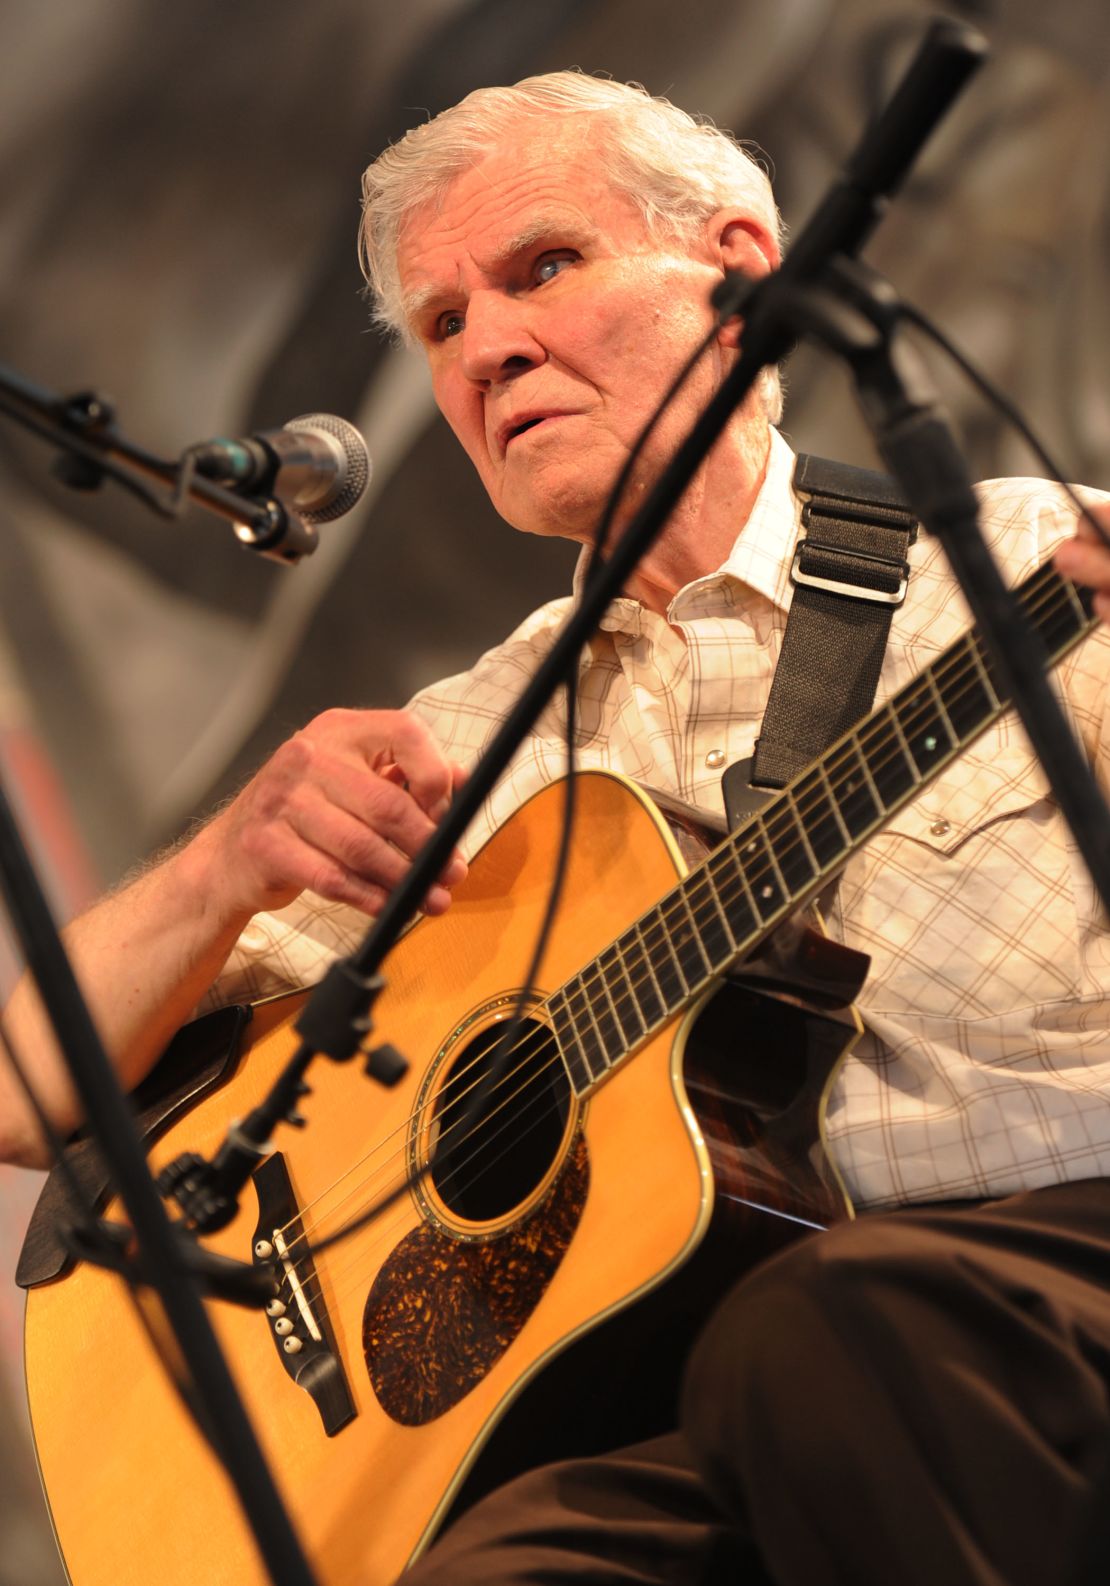 Performing here at the 2009 New Orleans Jazz Festival, the late Doc Watson helped put Gallagher Guitar Company on the map.